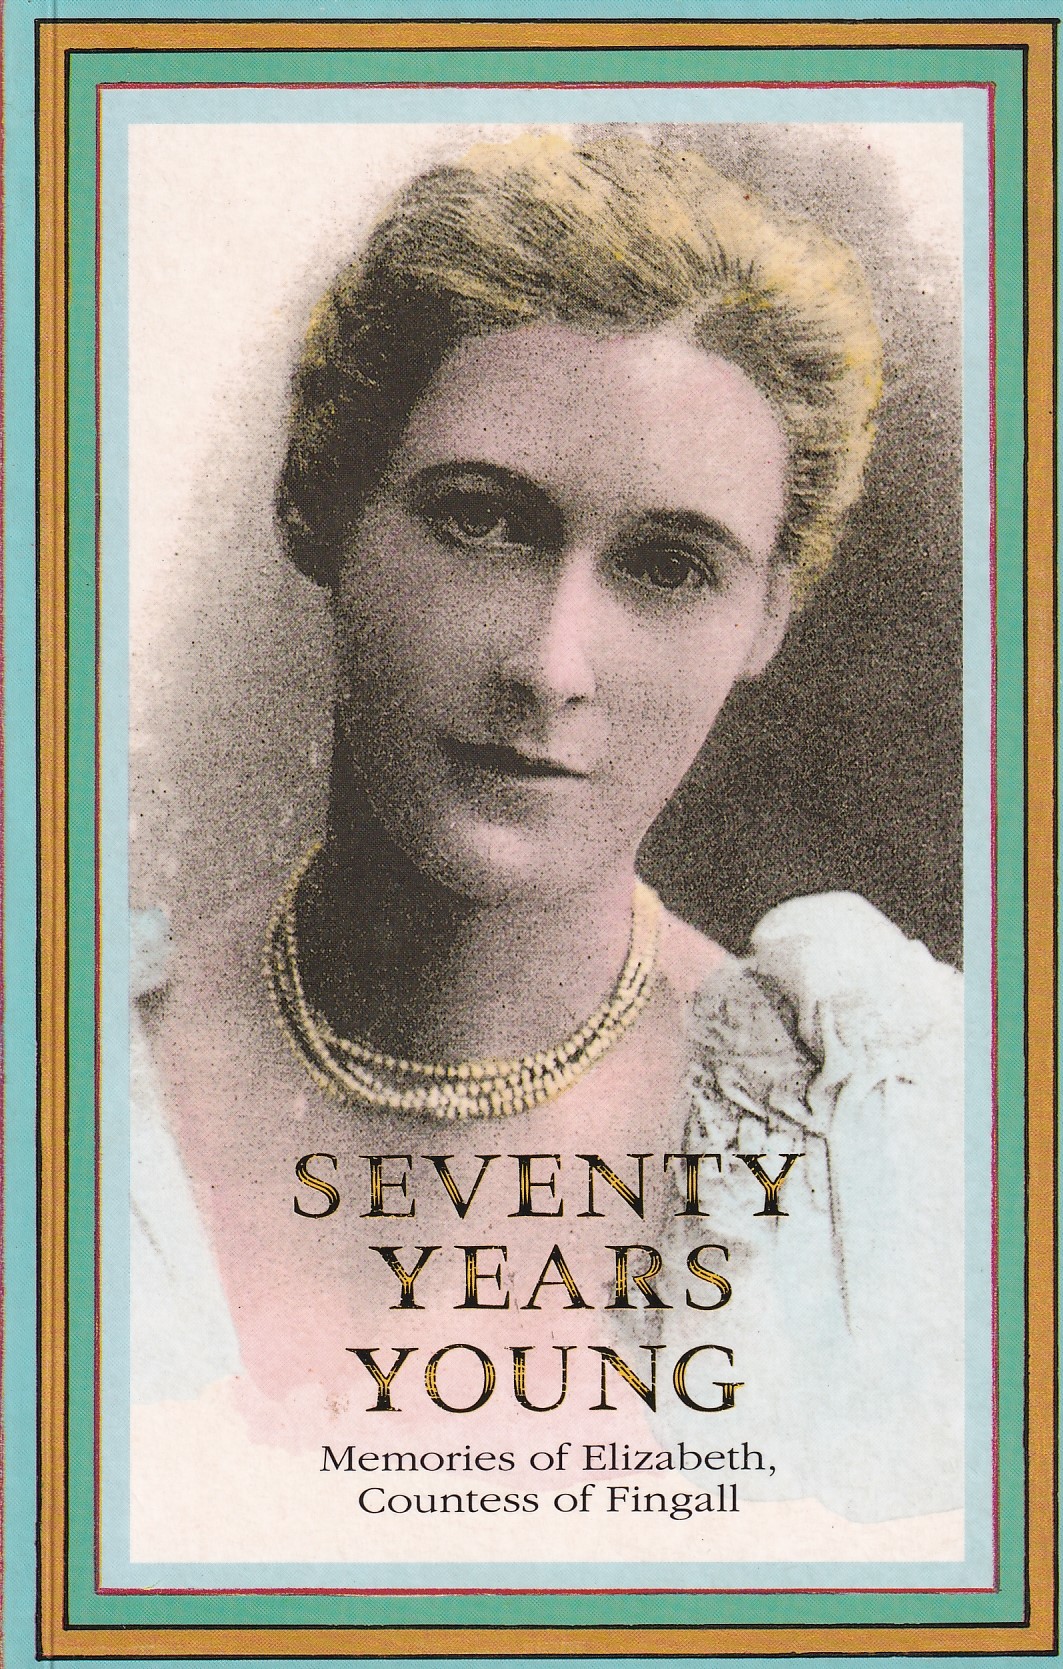 Seventy Years Young: Memories of Elizabeth, Countess of Fingall | Pamela Hinkson (as told to) | Charlie Byrne's